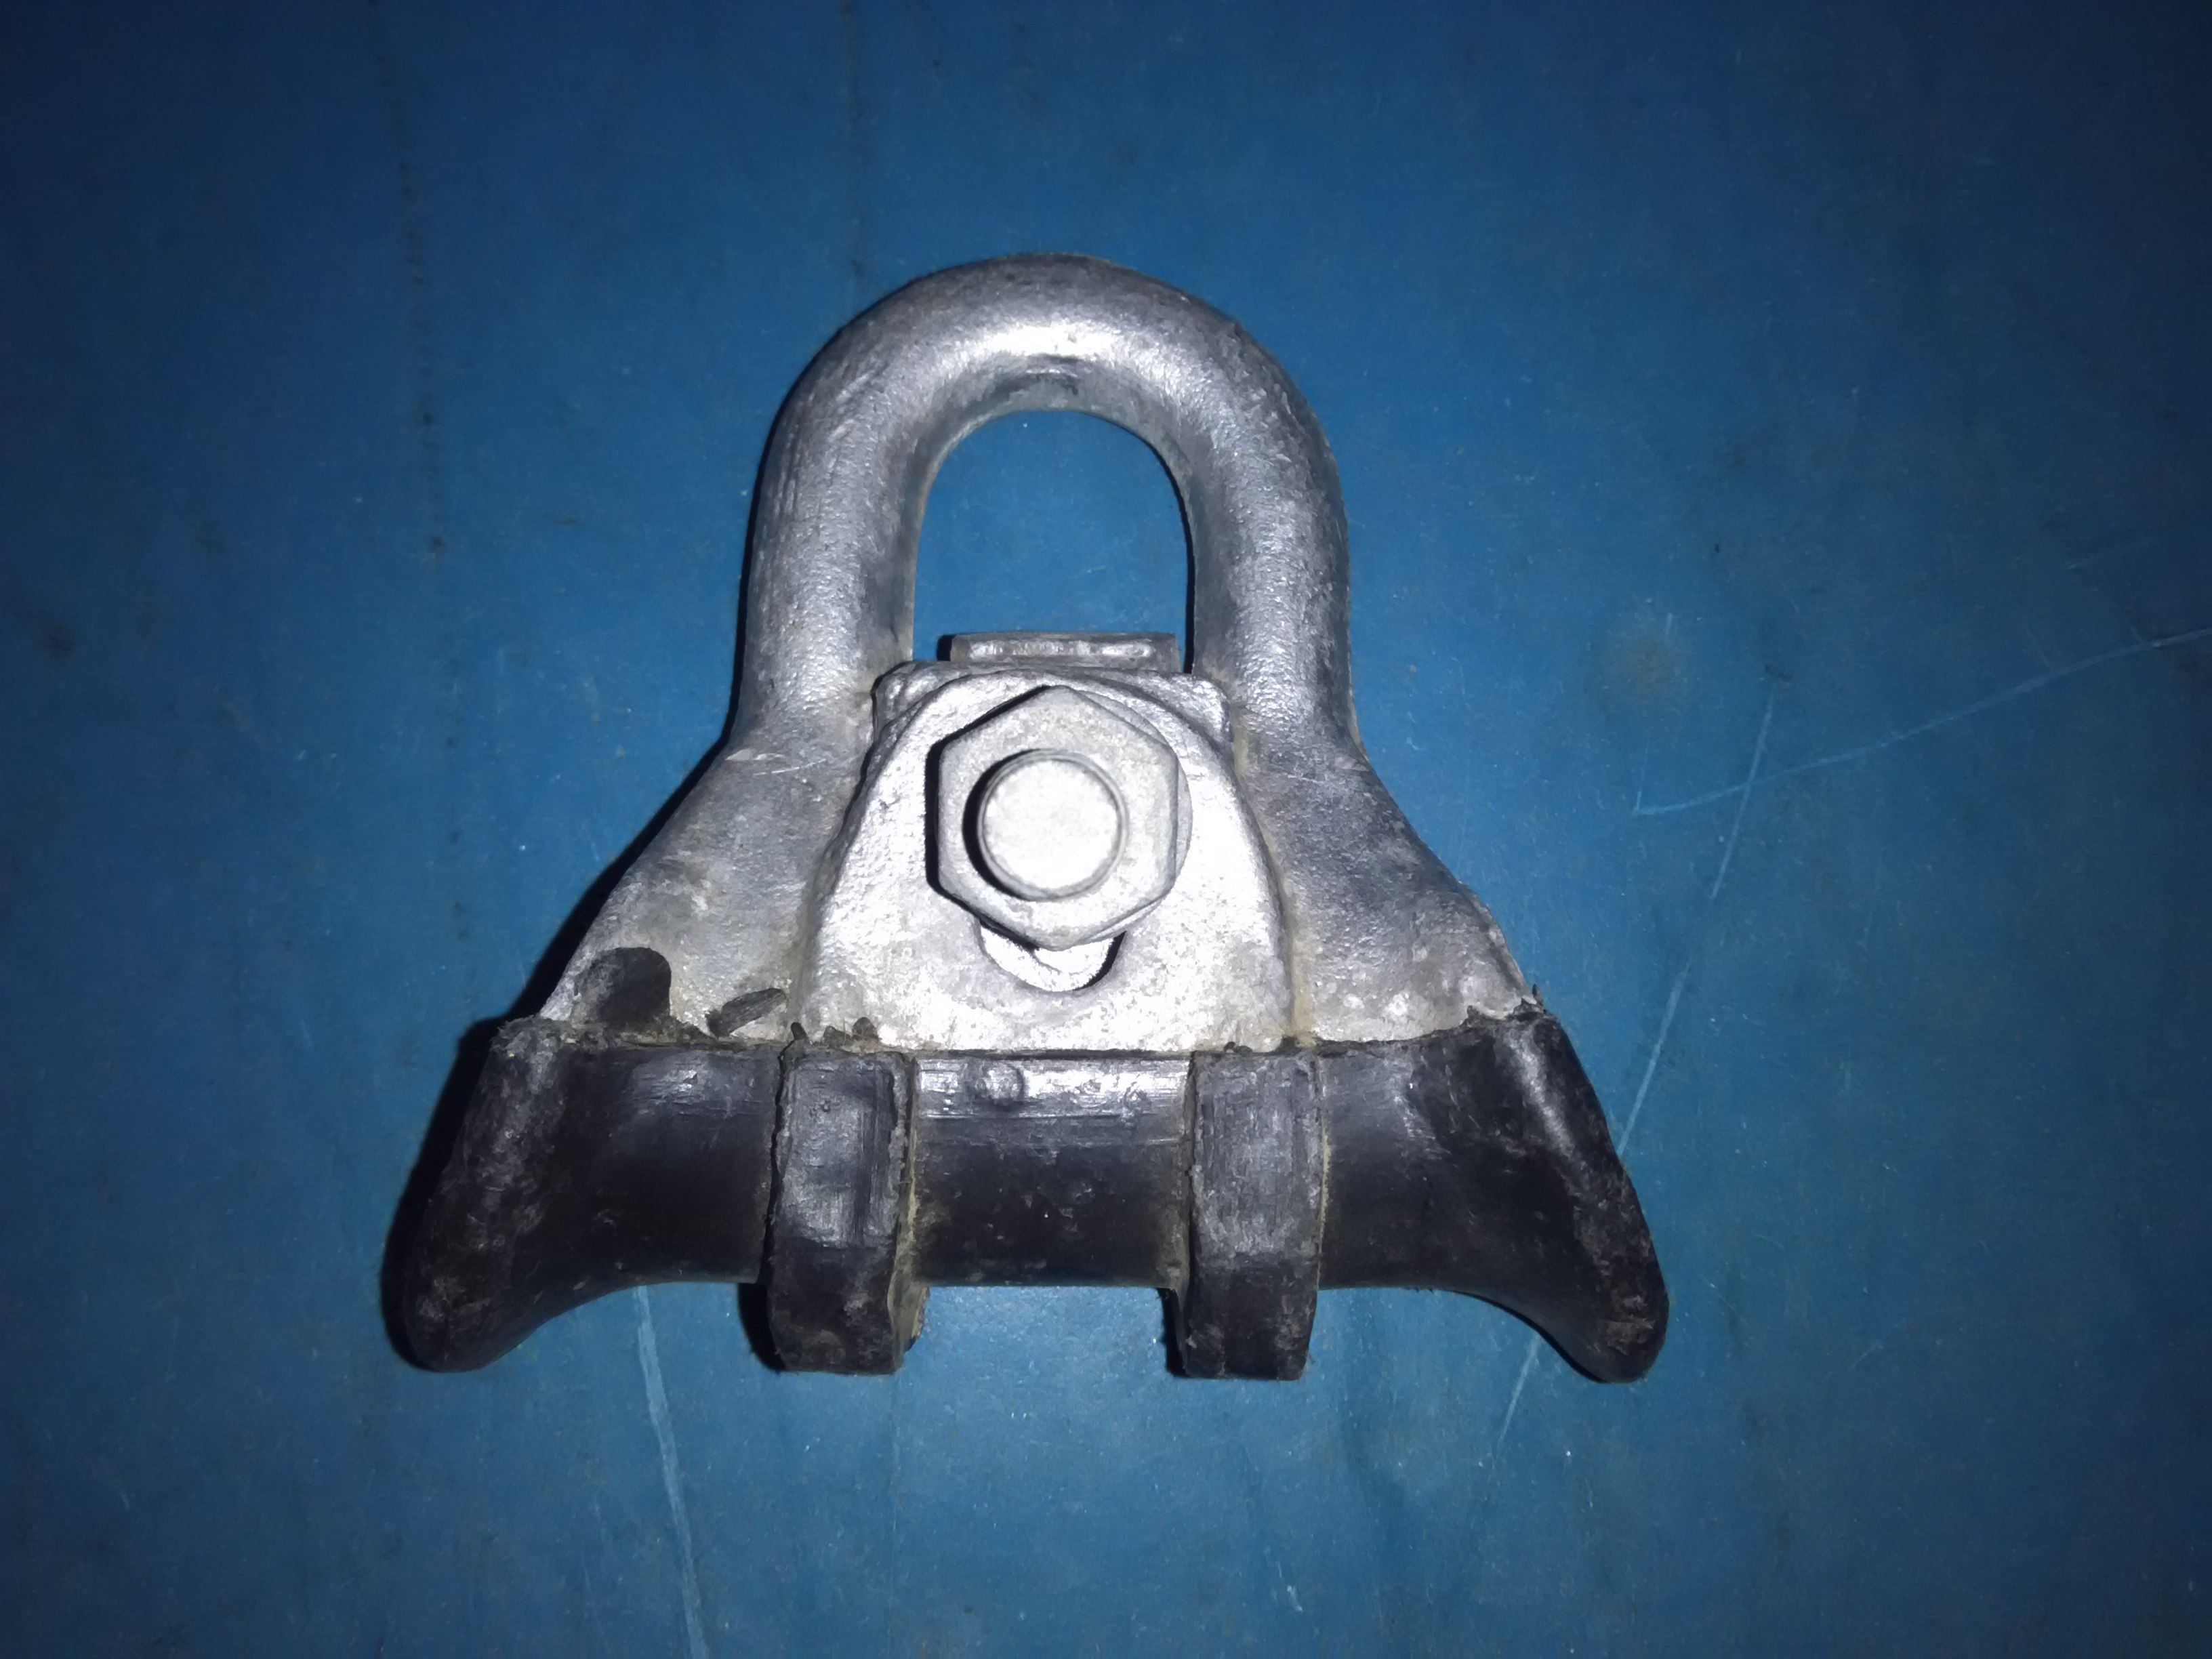 Dead End And Suspension Clamp Manufacturer,Dead End And Suspension